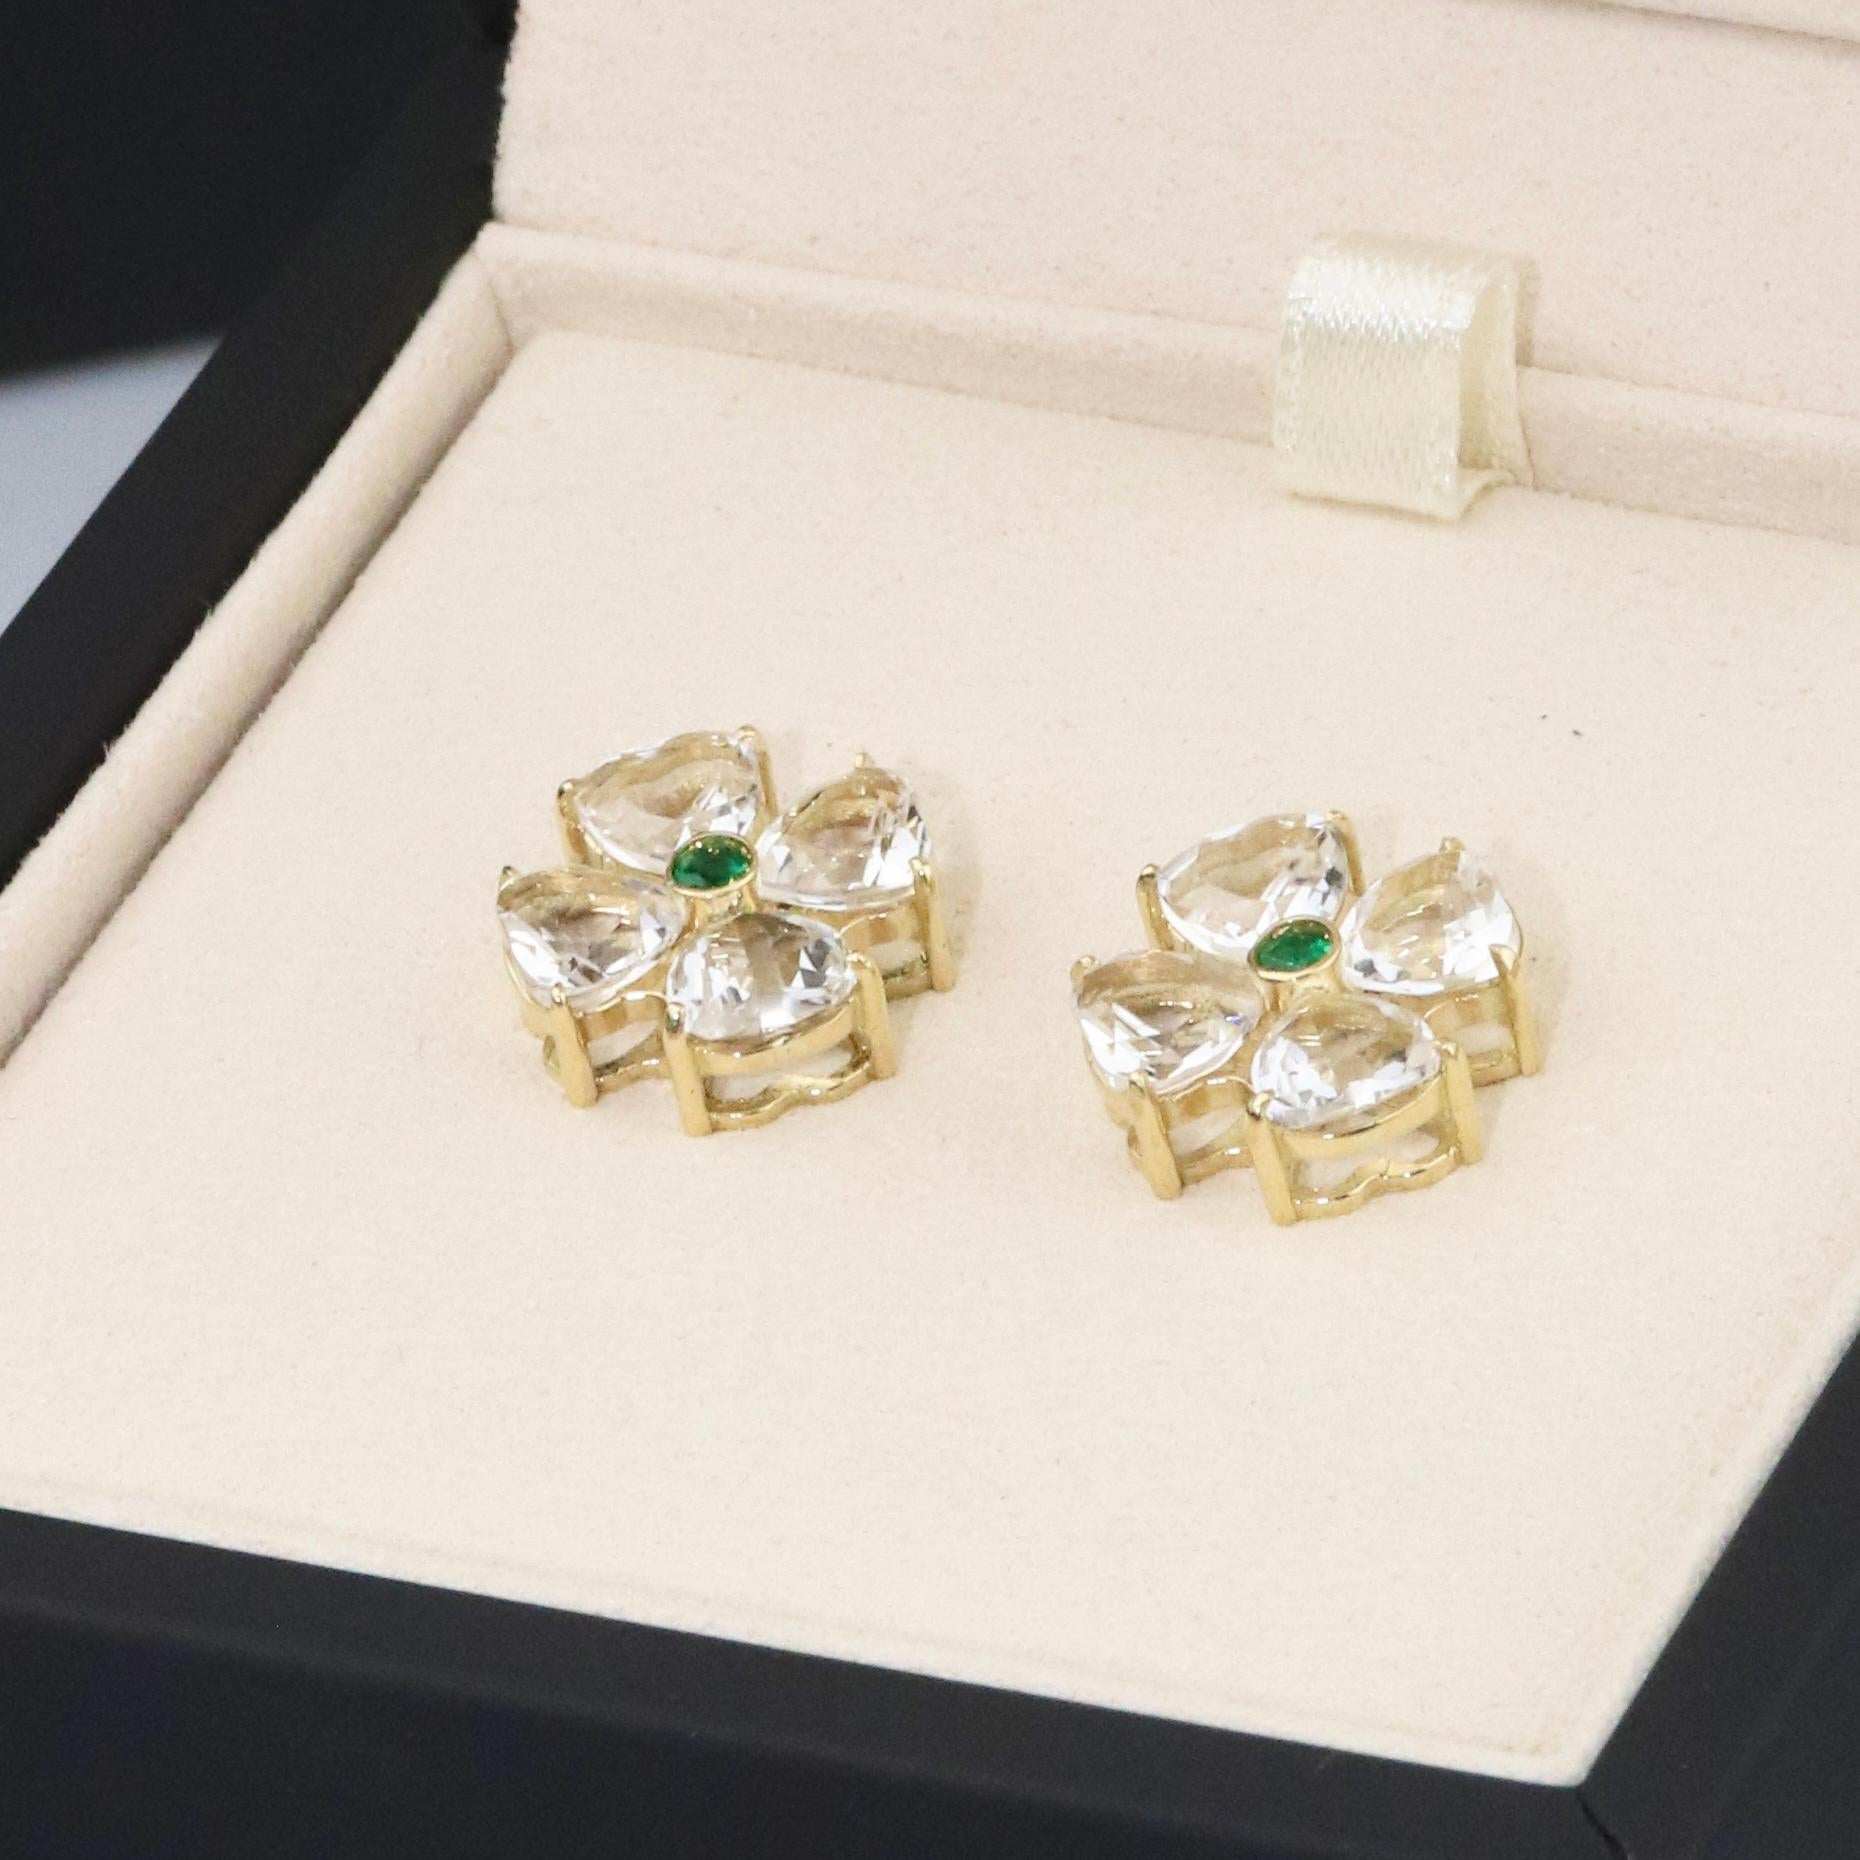 18K Solid Yellow Gold 

Natural Emerald Gemstones: Round Cut, Size 2.5mm

Natural Transparent Quartz Gemstones: Heart Shape, Size 6x6mm

Earrings: Flower Shape

Gross Weight: 7.1g

The color gemstones are from Brazil.

The earrings are flower shapes